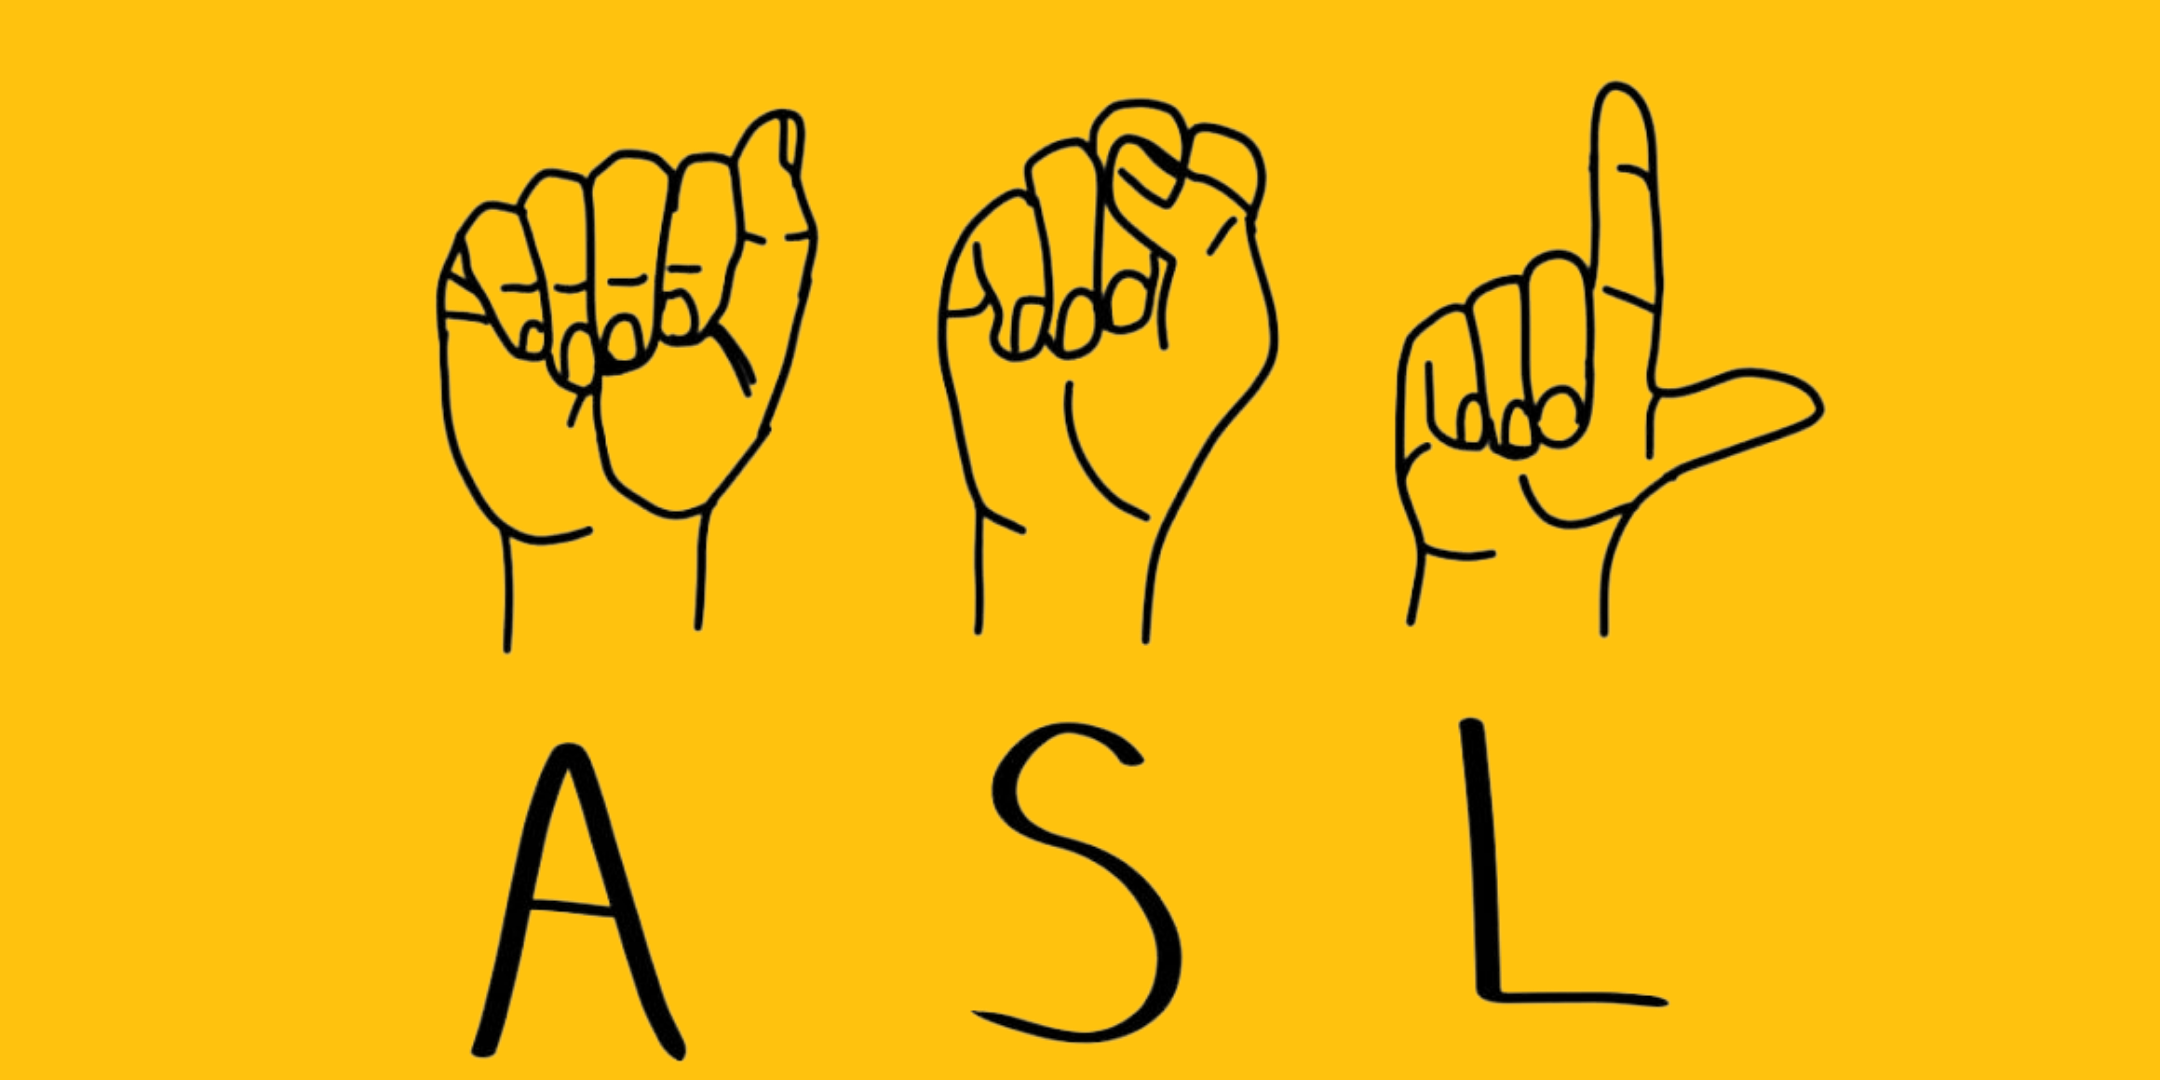 american sign language words and phrases